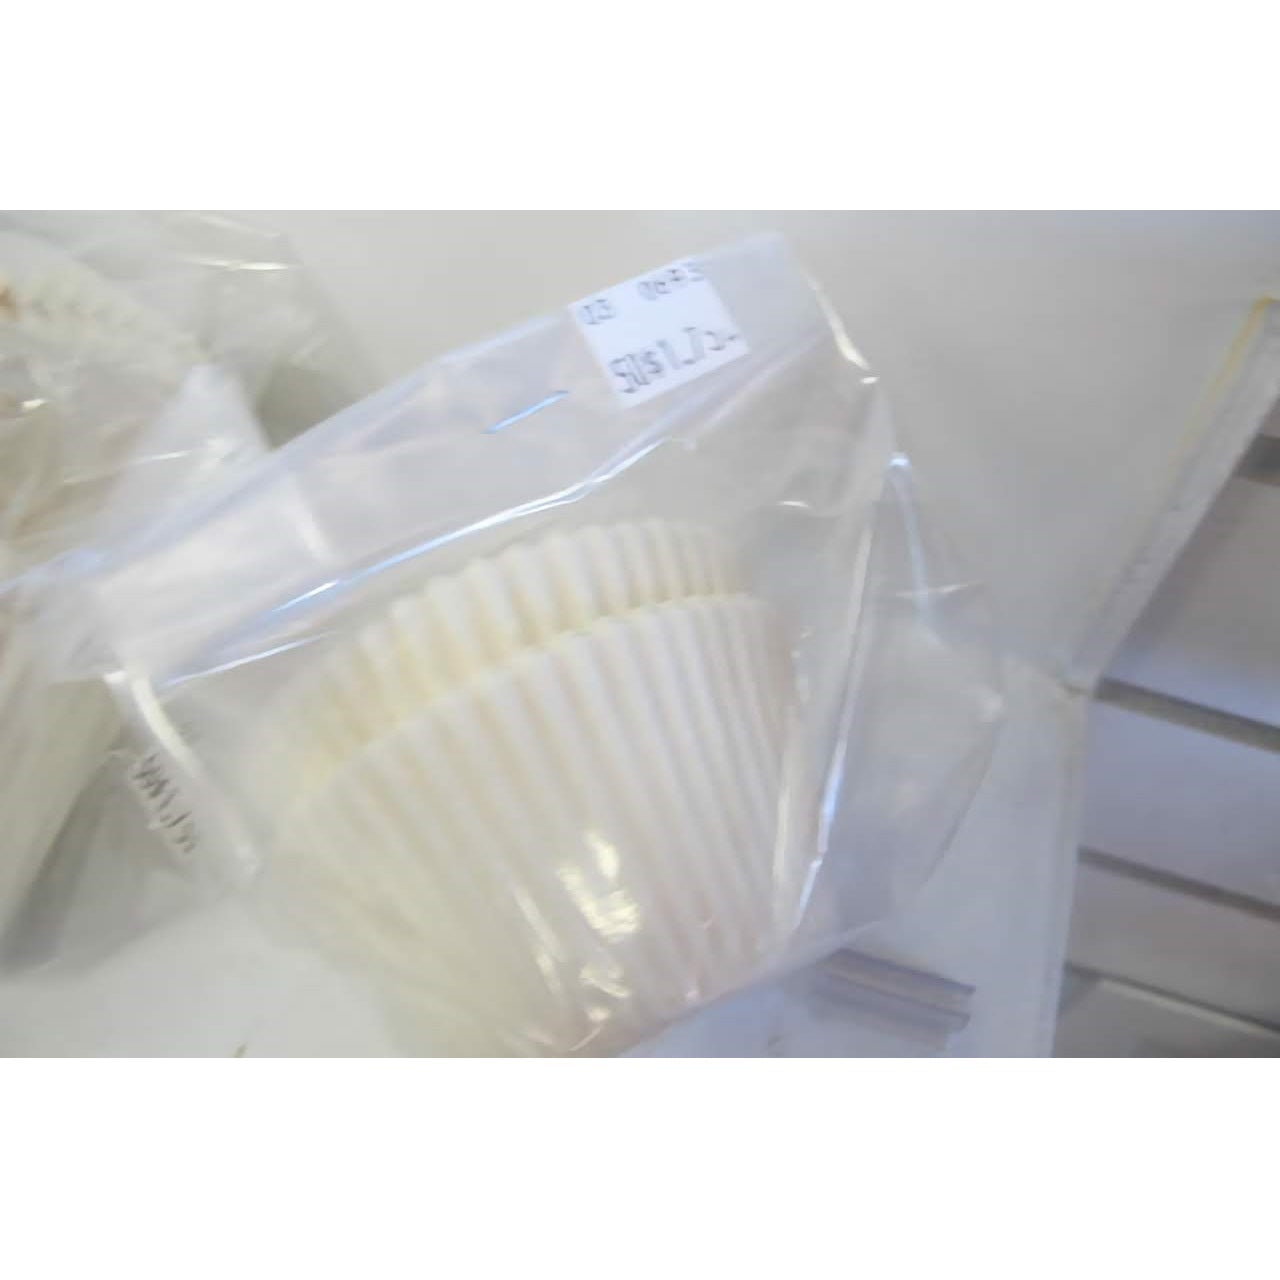 A package of white jumbo baking cups